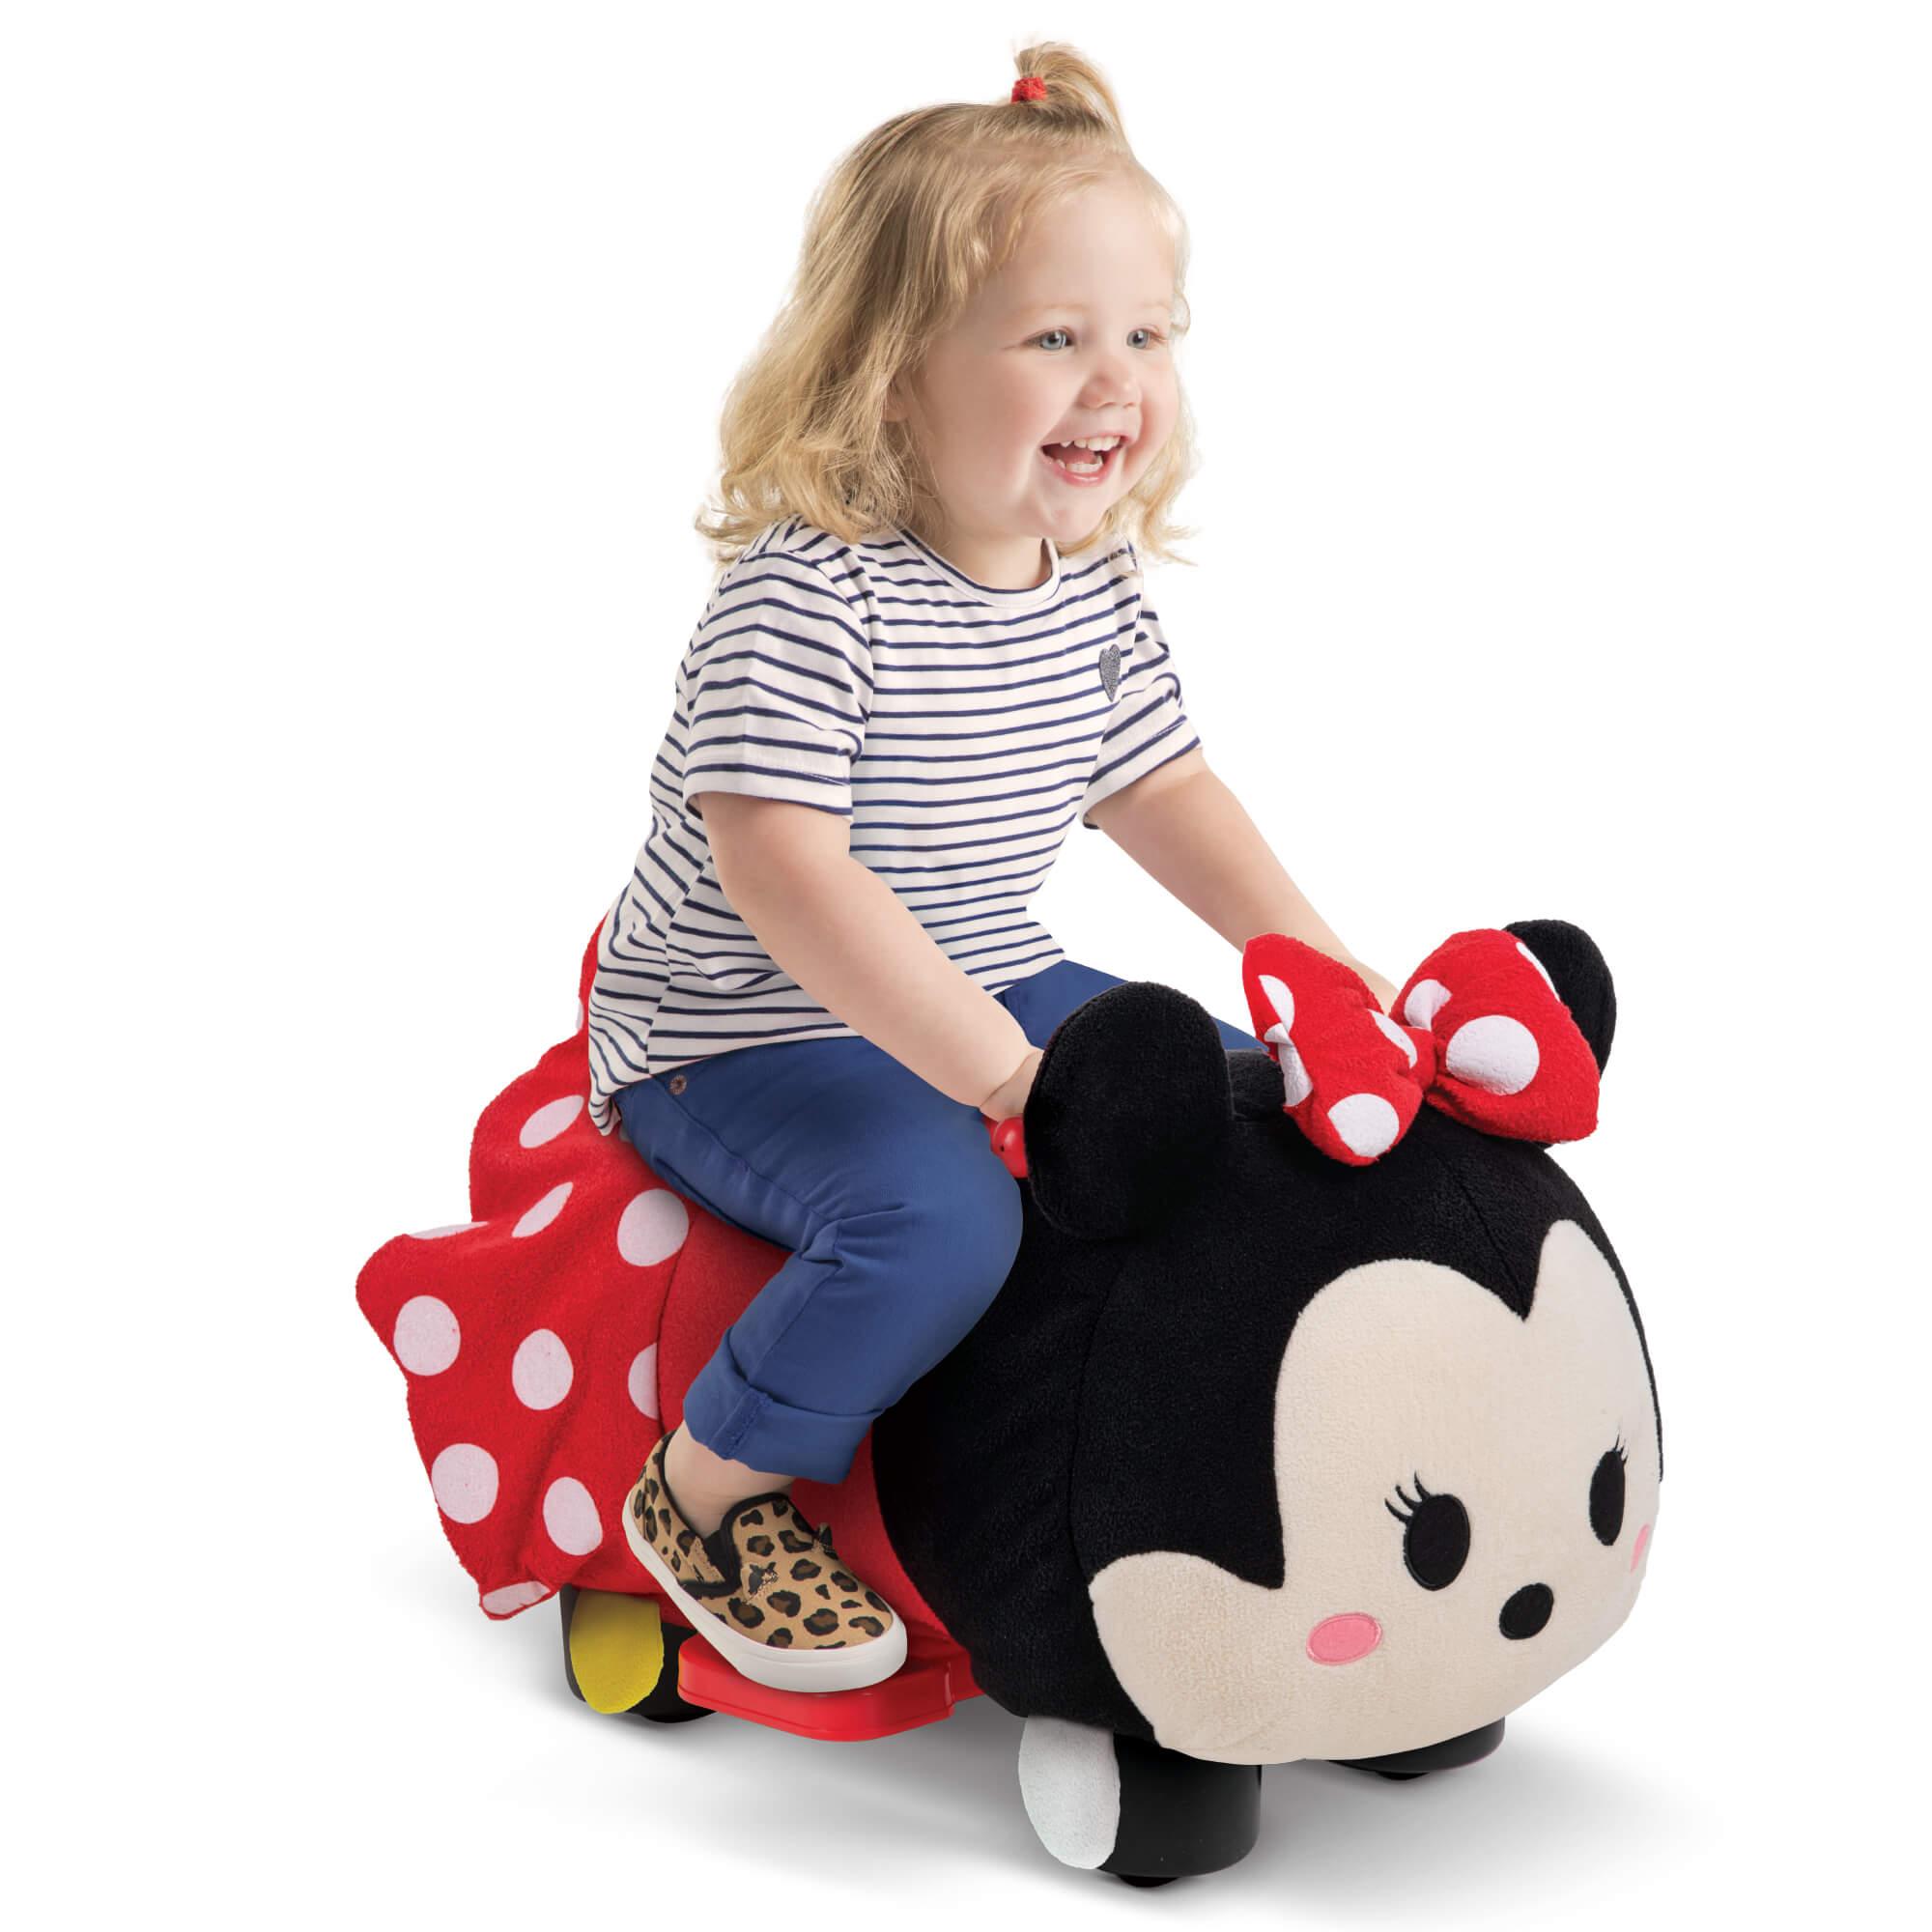 Disney Minnie Mouse Tsum Tsum Ride-on Plush Toy by Huffy - image 1 of 10